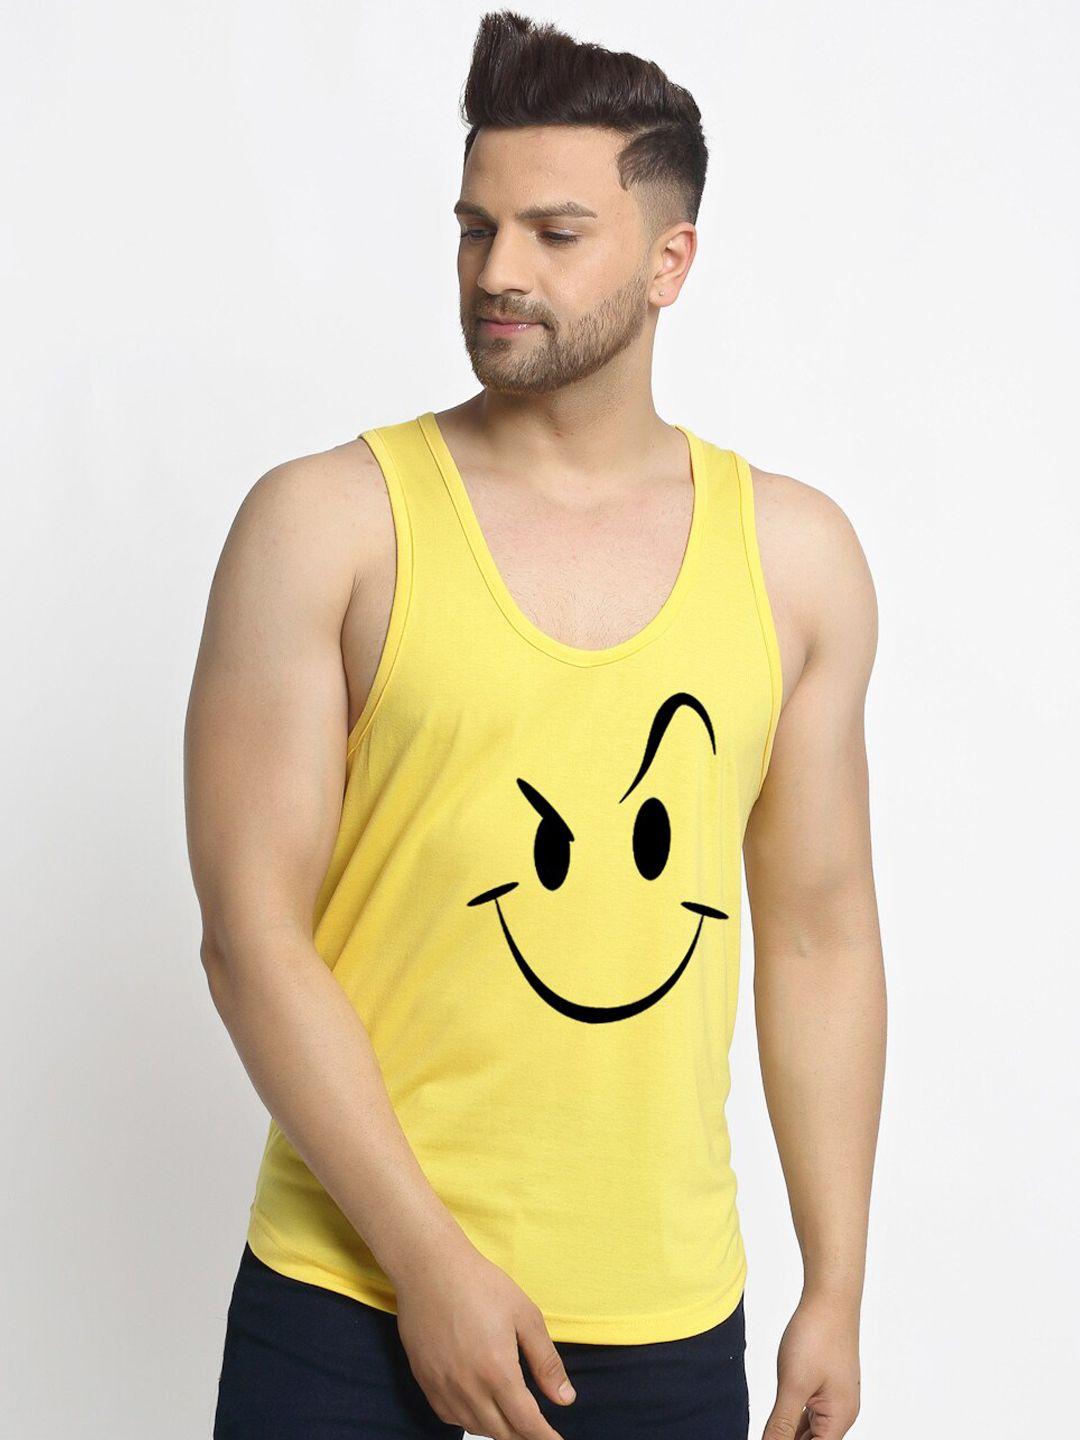 friskers-men-yellow-printed-cotton-gym-innerwear-vests